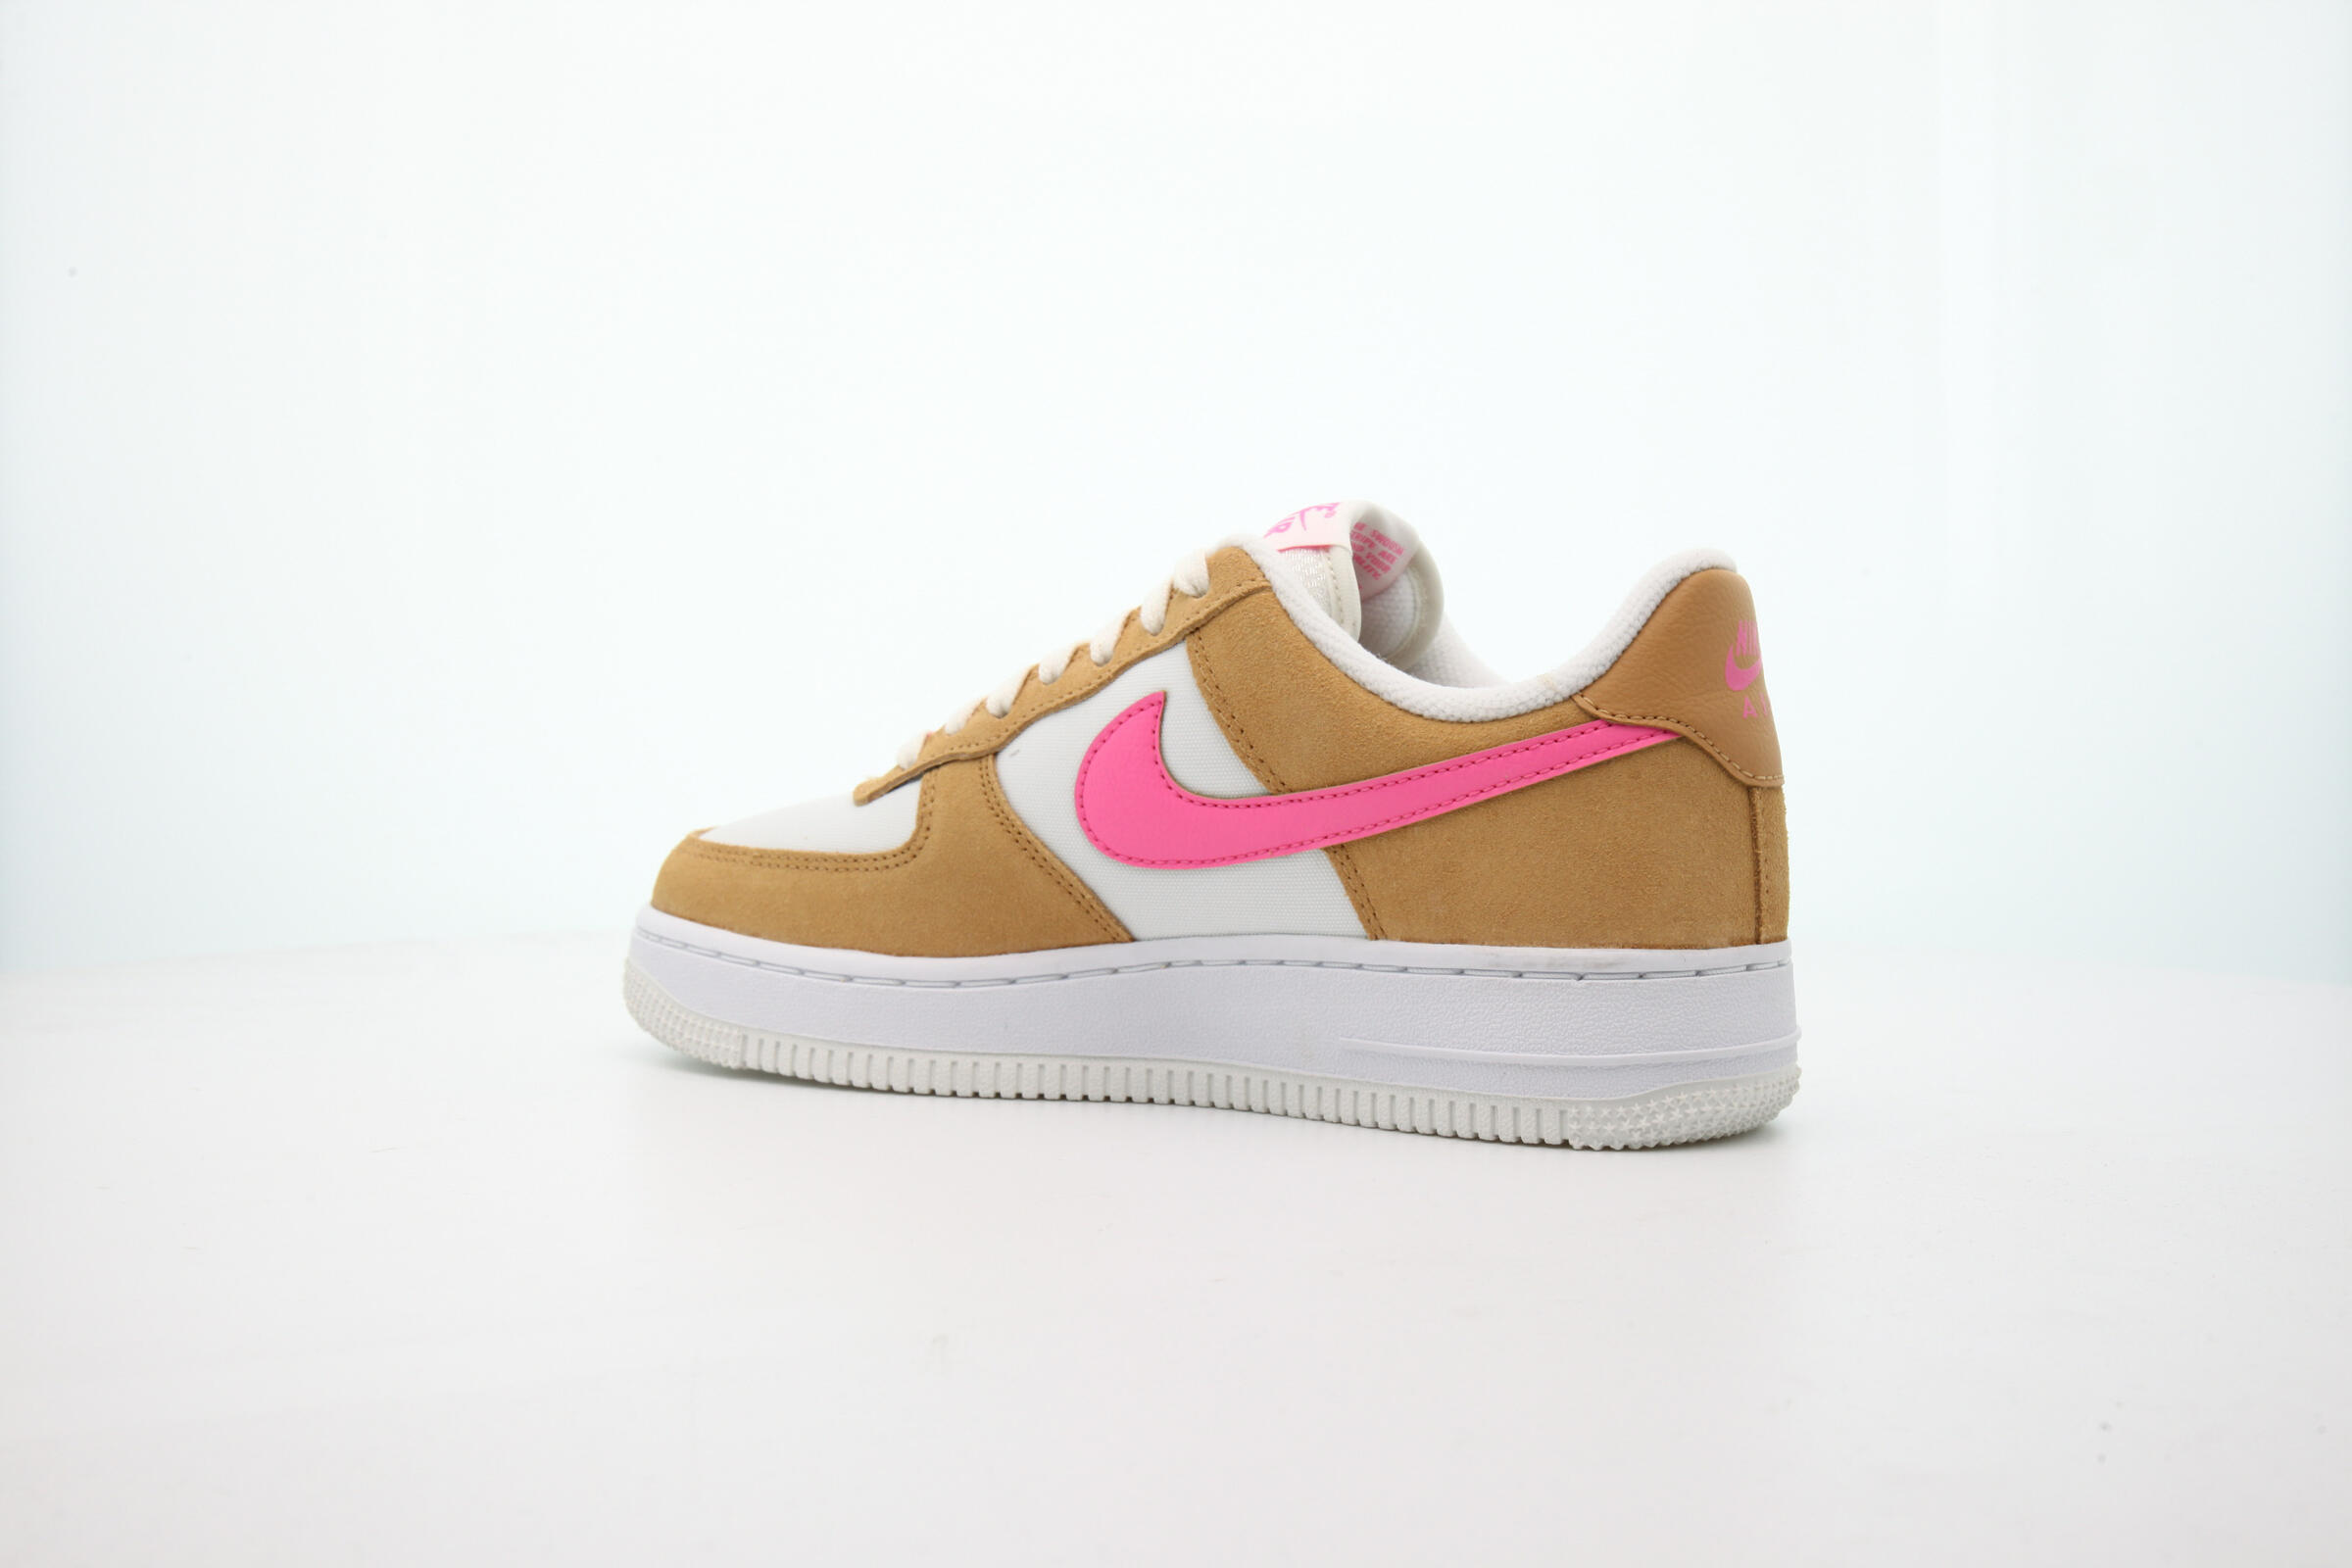 Nike WMNS AIR FORCE 1 '07 "TWINE"